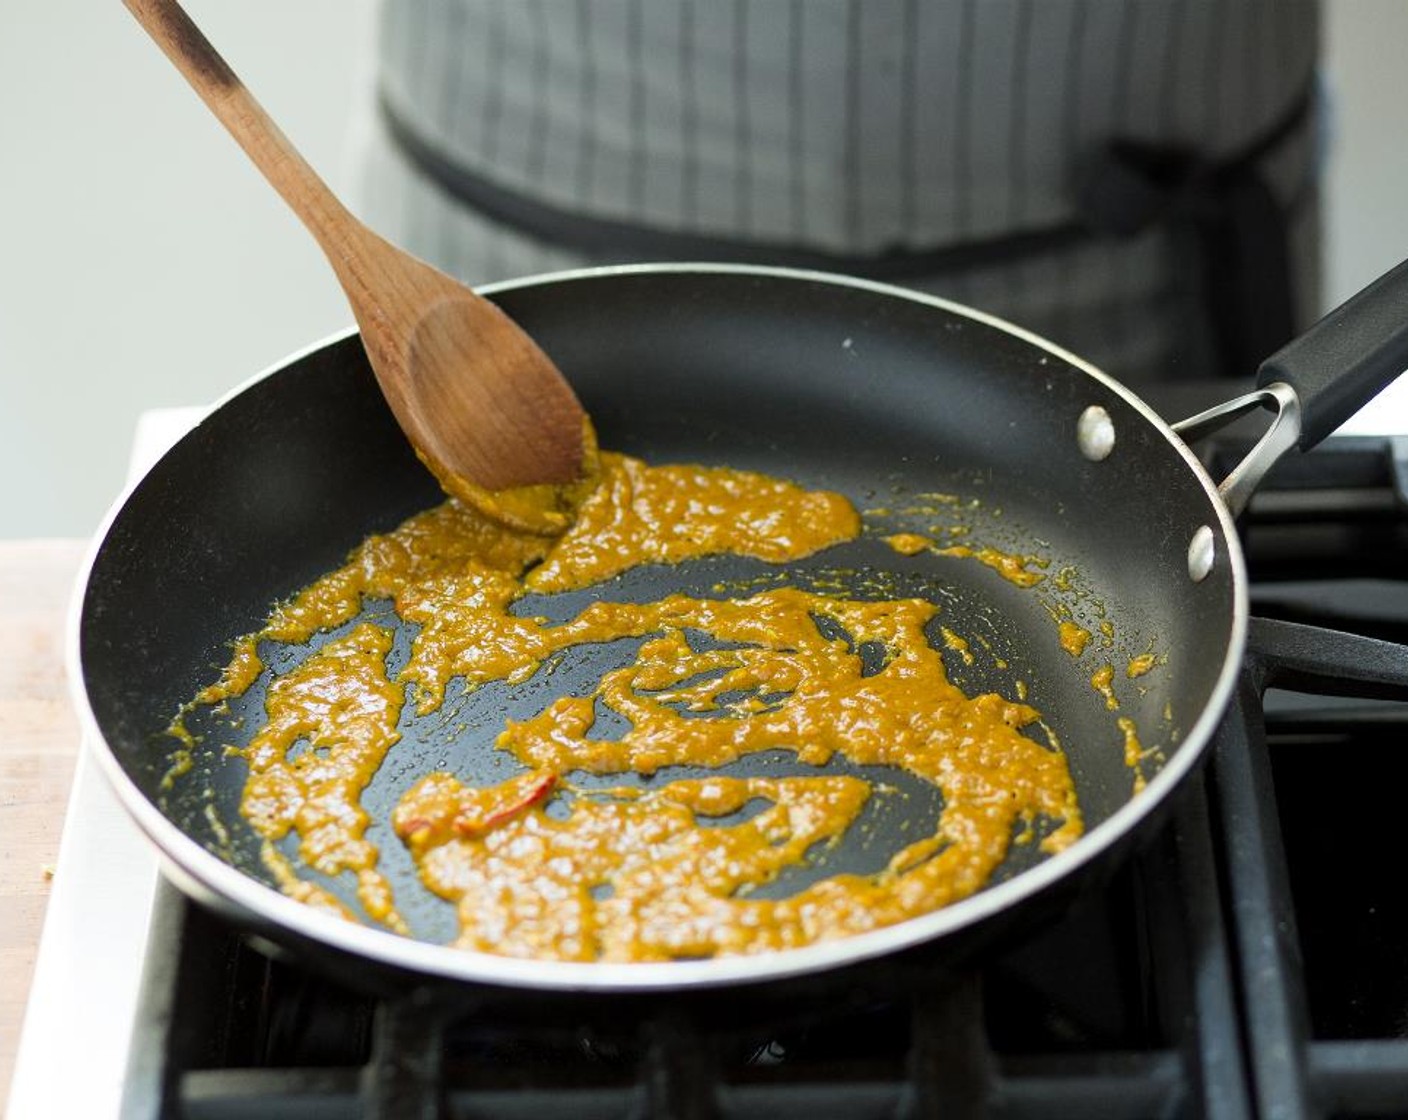 step 7 To same hot pan, add only 1/4 cup of the Coconut Milk (1 can), Ground Turmeric (1 tsp), Kosher Salt (1 tsp), Curry Powder (1 tsp), Sambal (1 tsp), Brown Sugar (1 Tbsp), Dried Chili Pepper (1), ginger and garlic and cook for 1 minute.